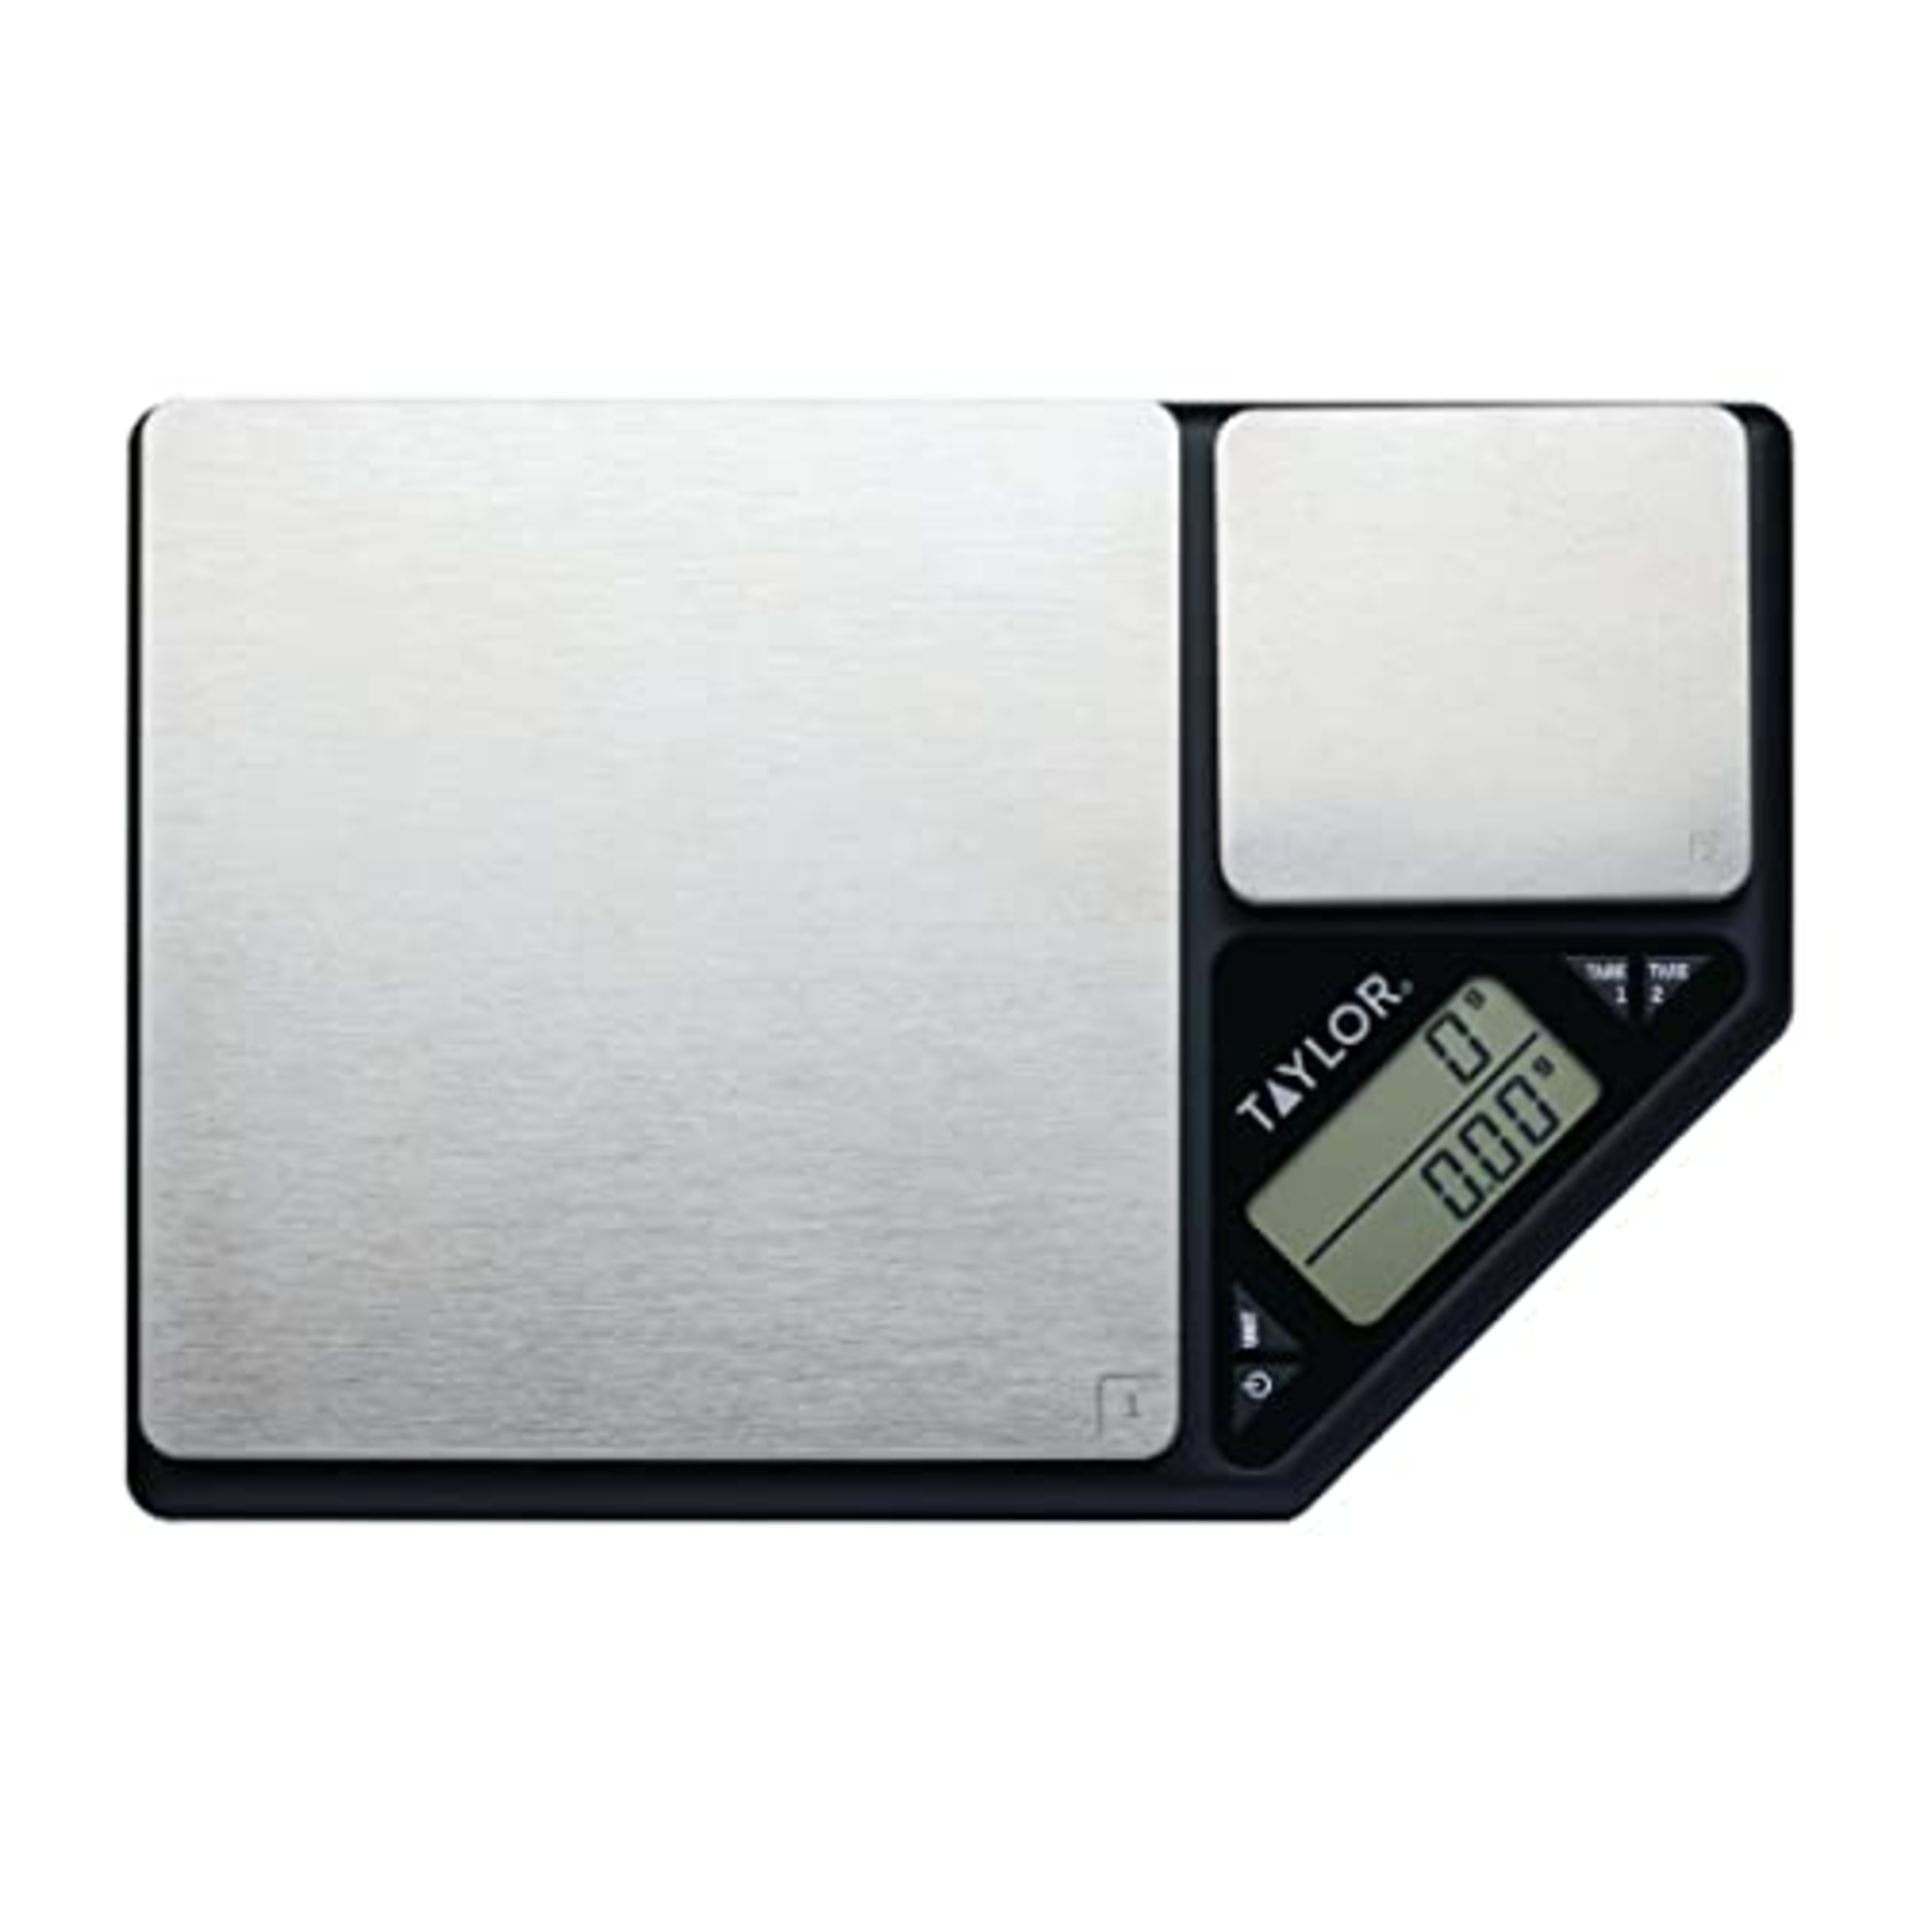 Taylor Pro Digital Kitchen Food Scales with Dual Platform Weighing Design, Professiona